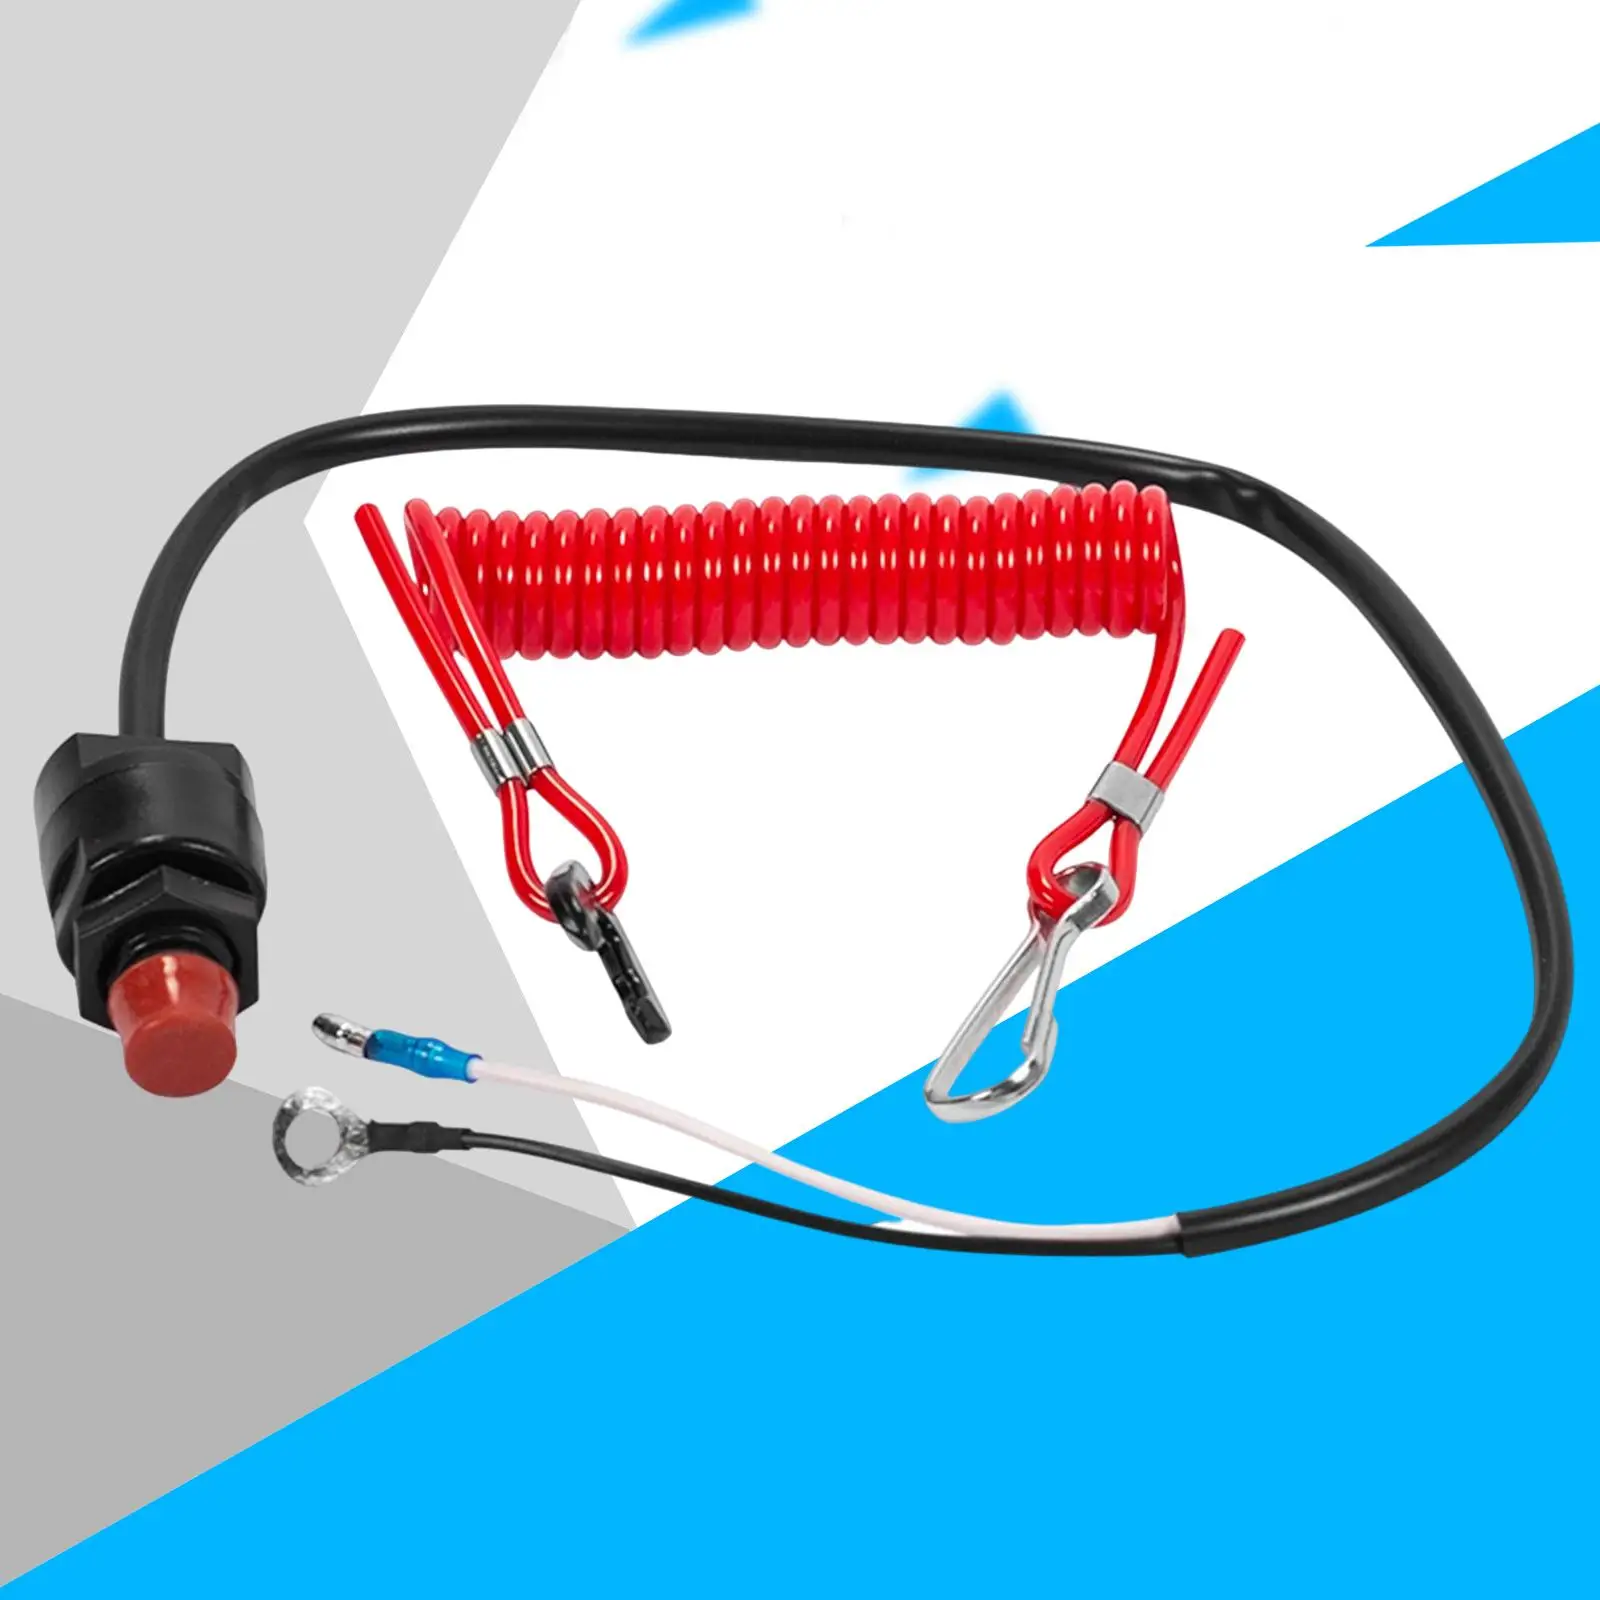 Flameout Switch Emergency Red Ignition Rope Cut Out for Boat Outboard